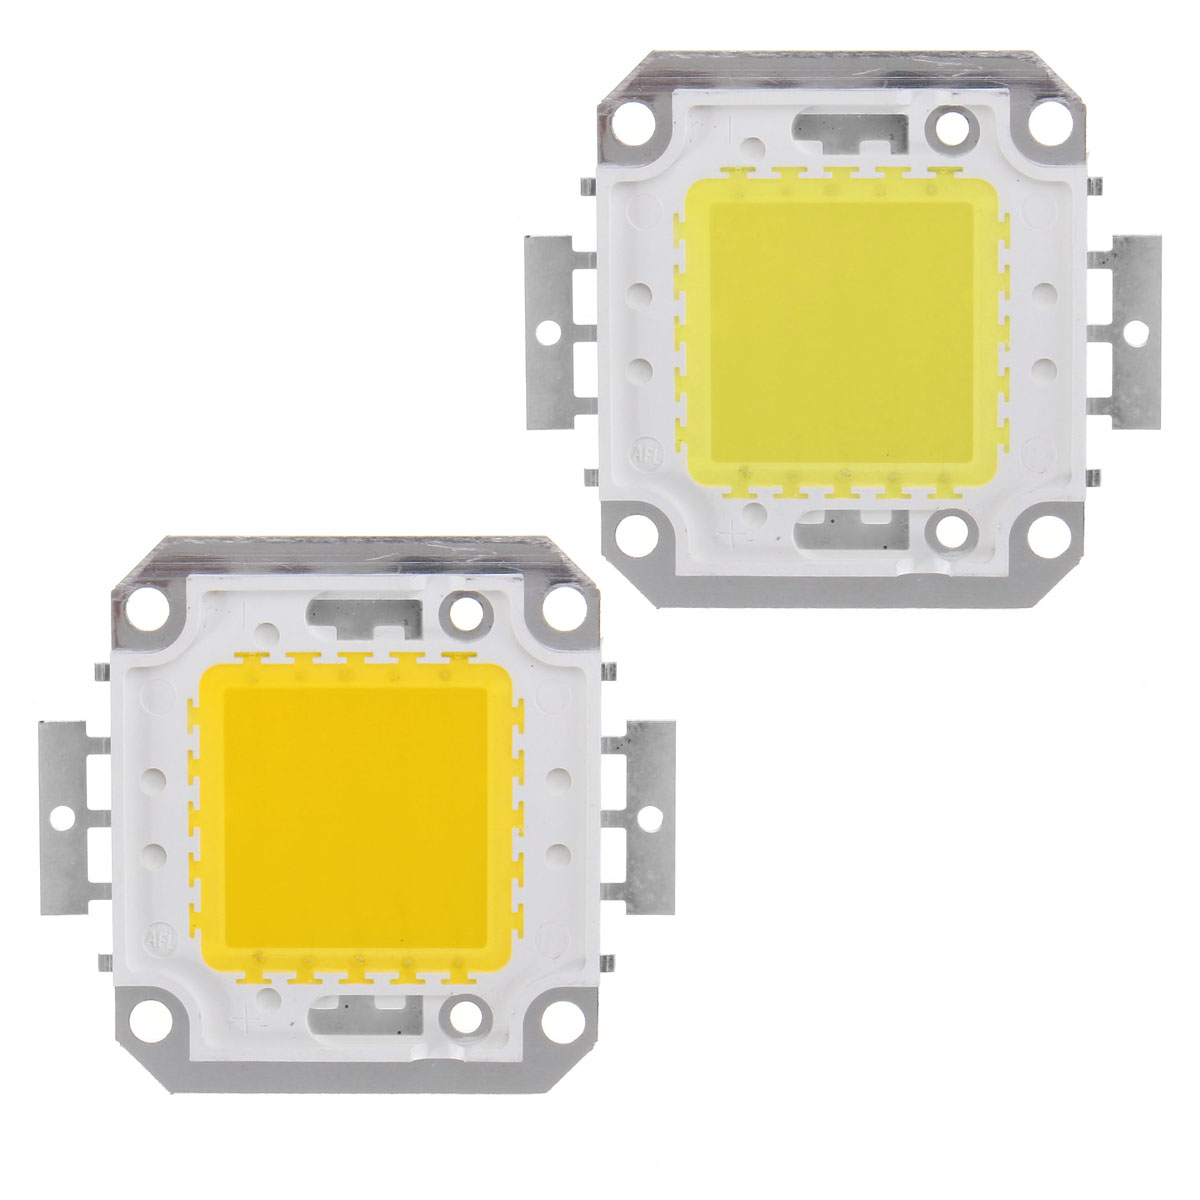 AC85-265V-23W-Waterproof-High-Power--LED-Driver-Supply-SMD-Chip-for-Flood-Light-1160568